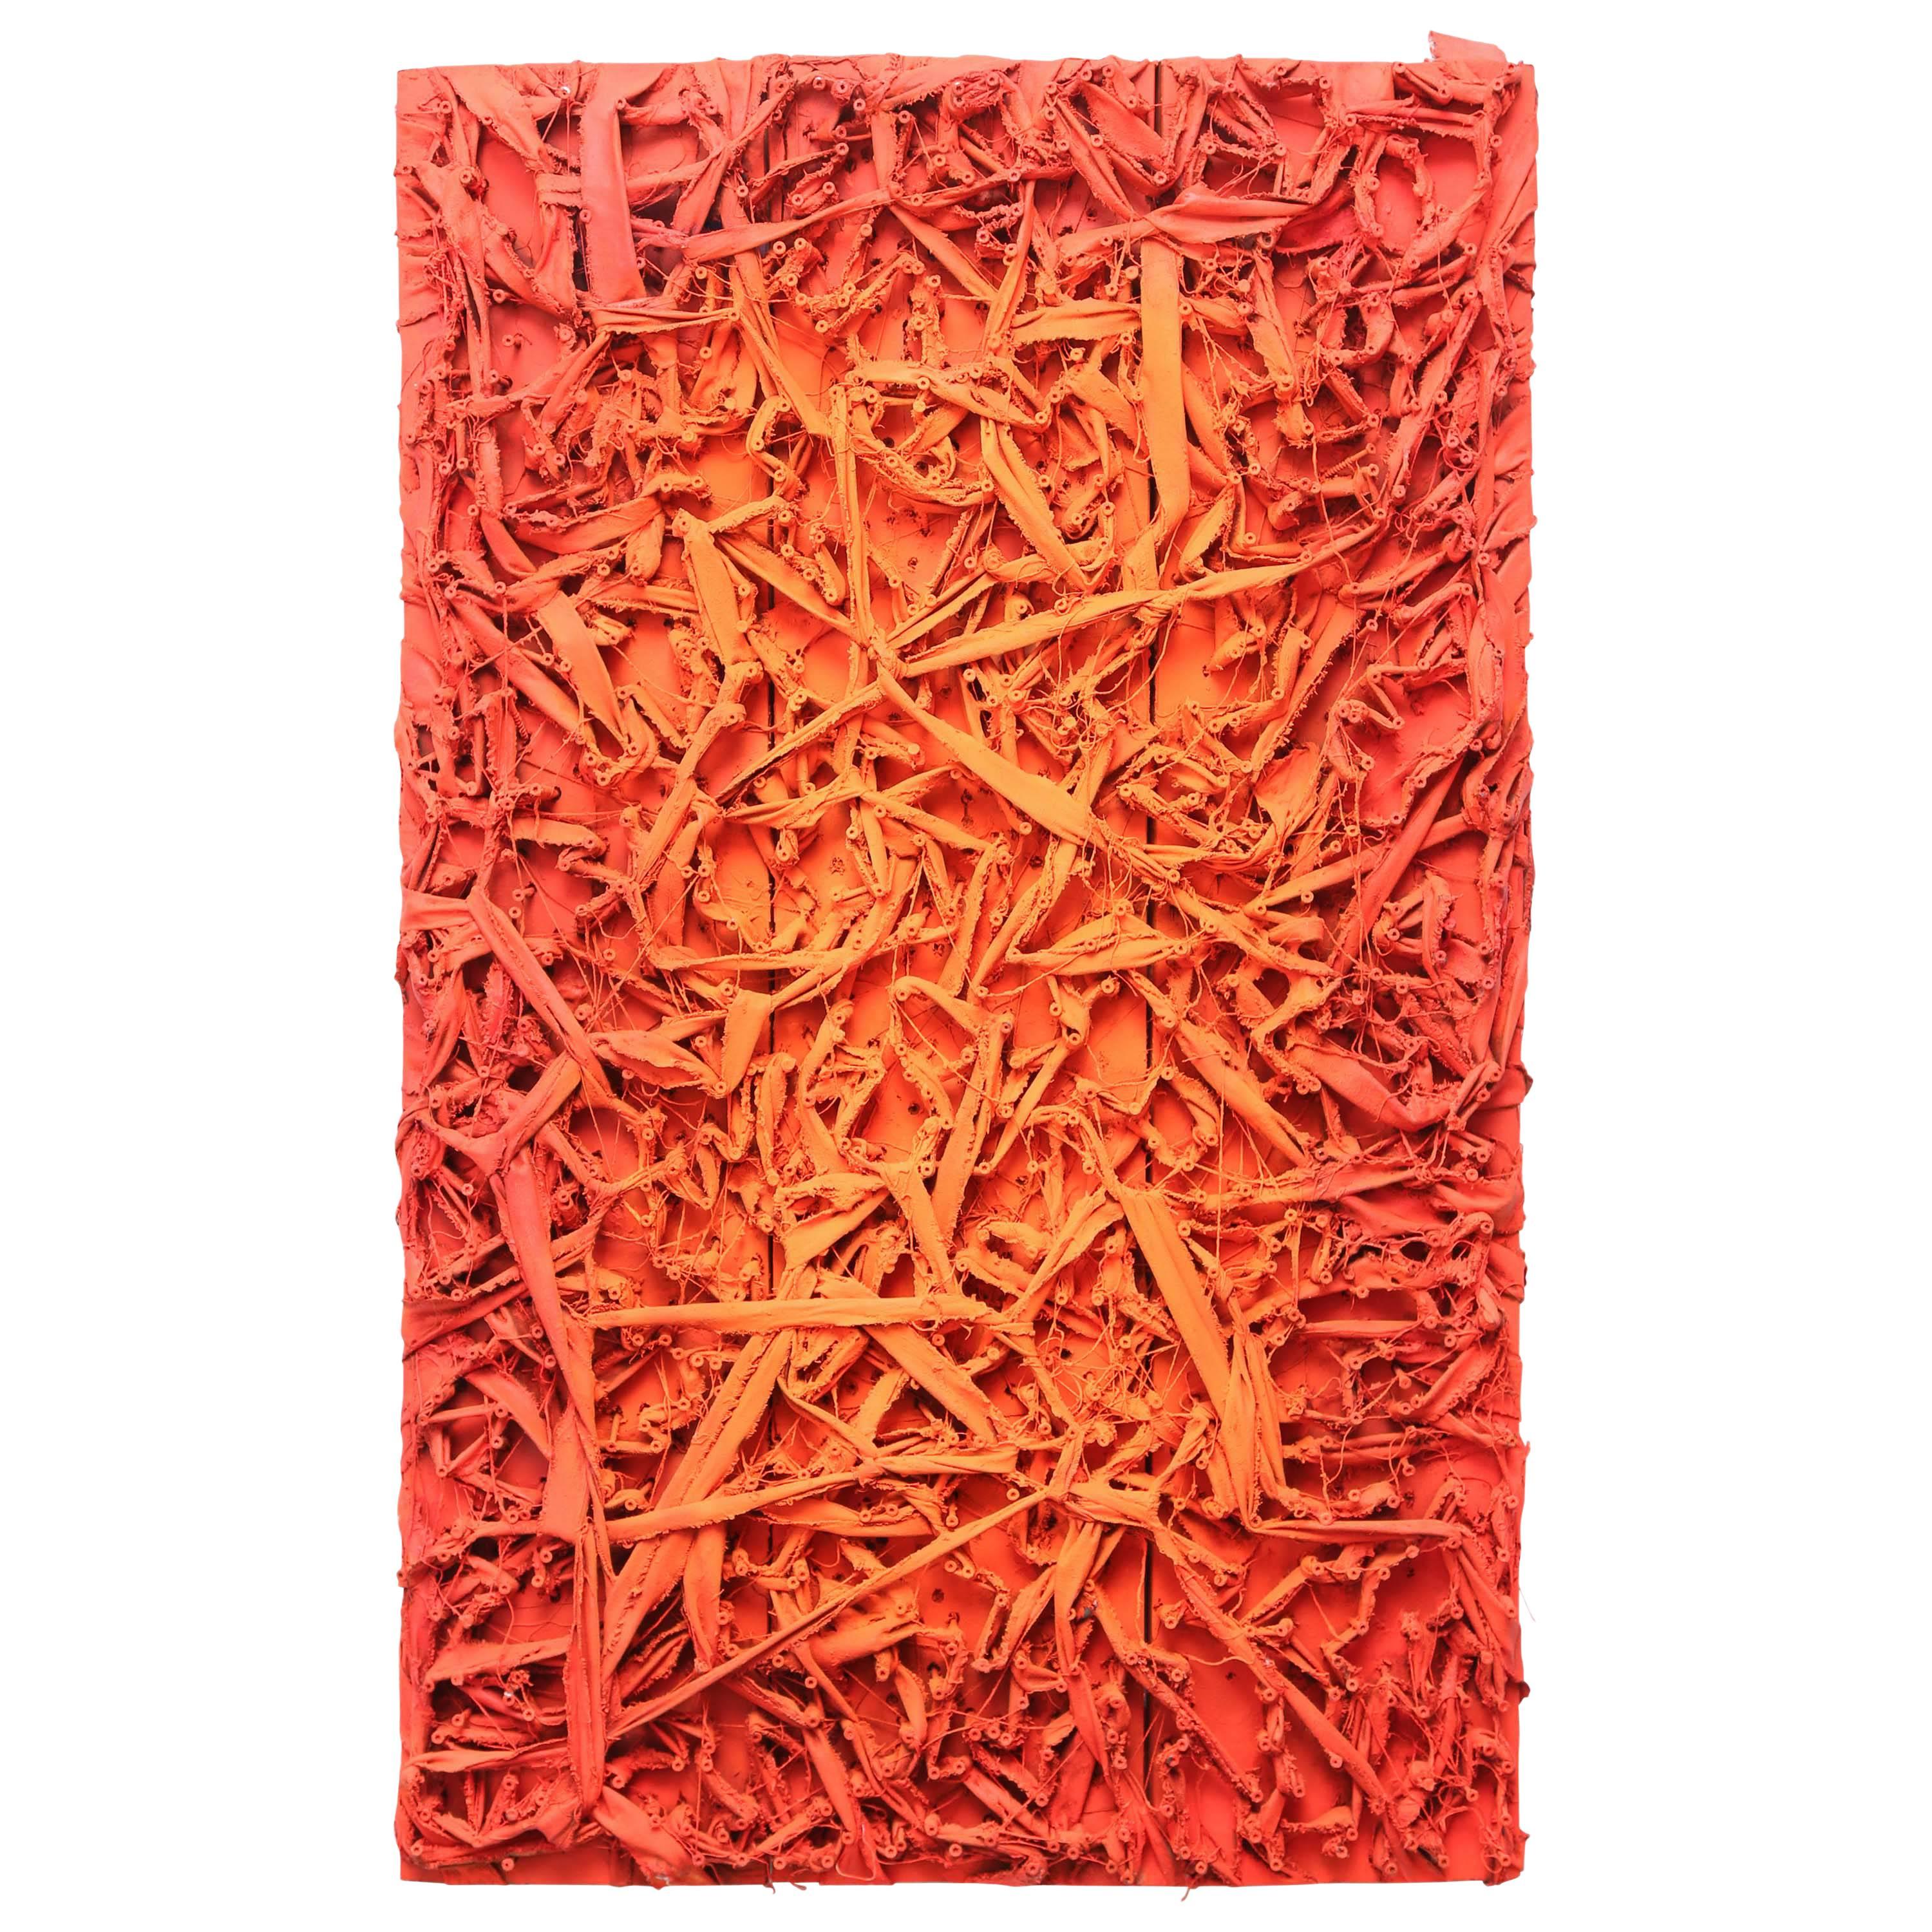 Oversized Contemporary Art in Shades of Orange and Red, USA, 2011 For Sale